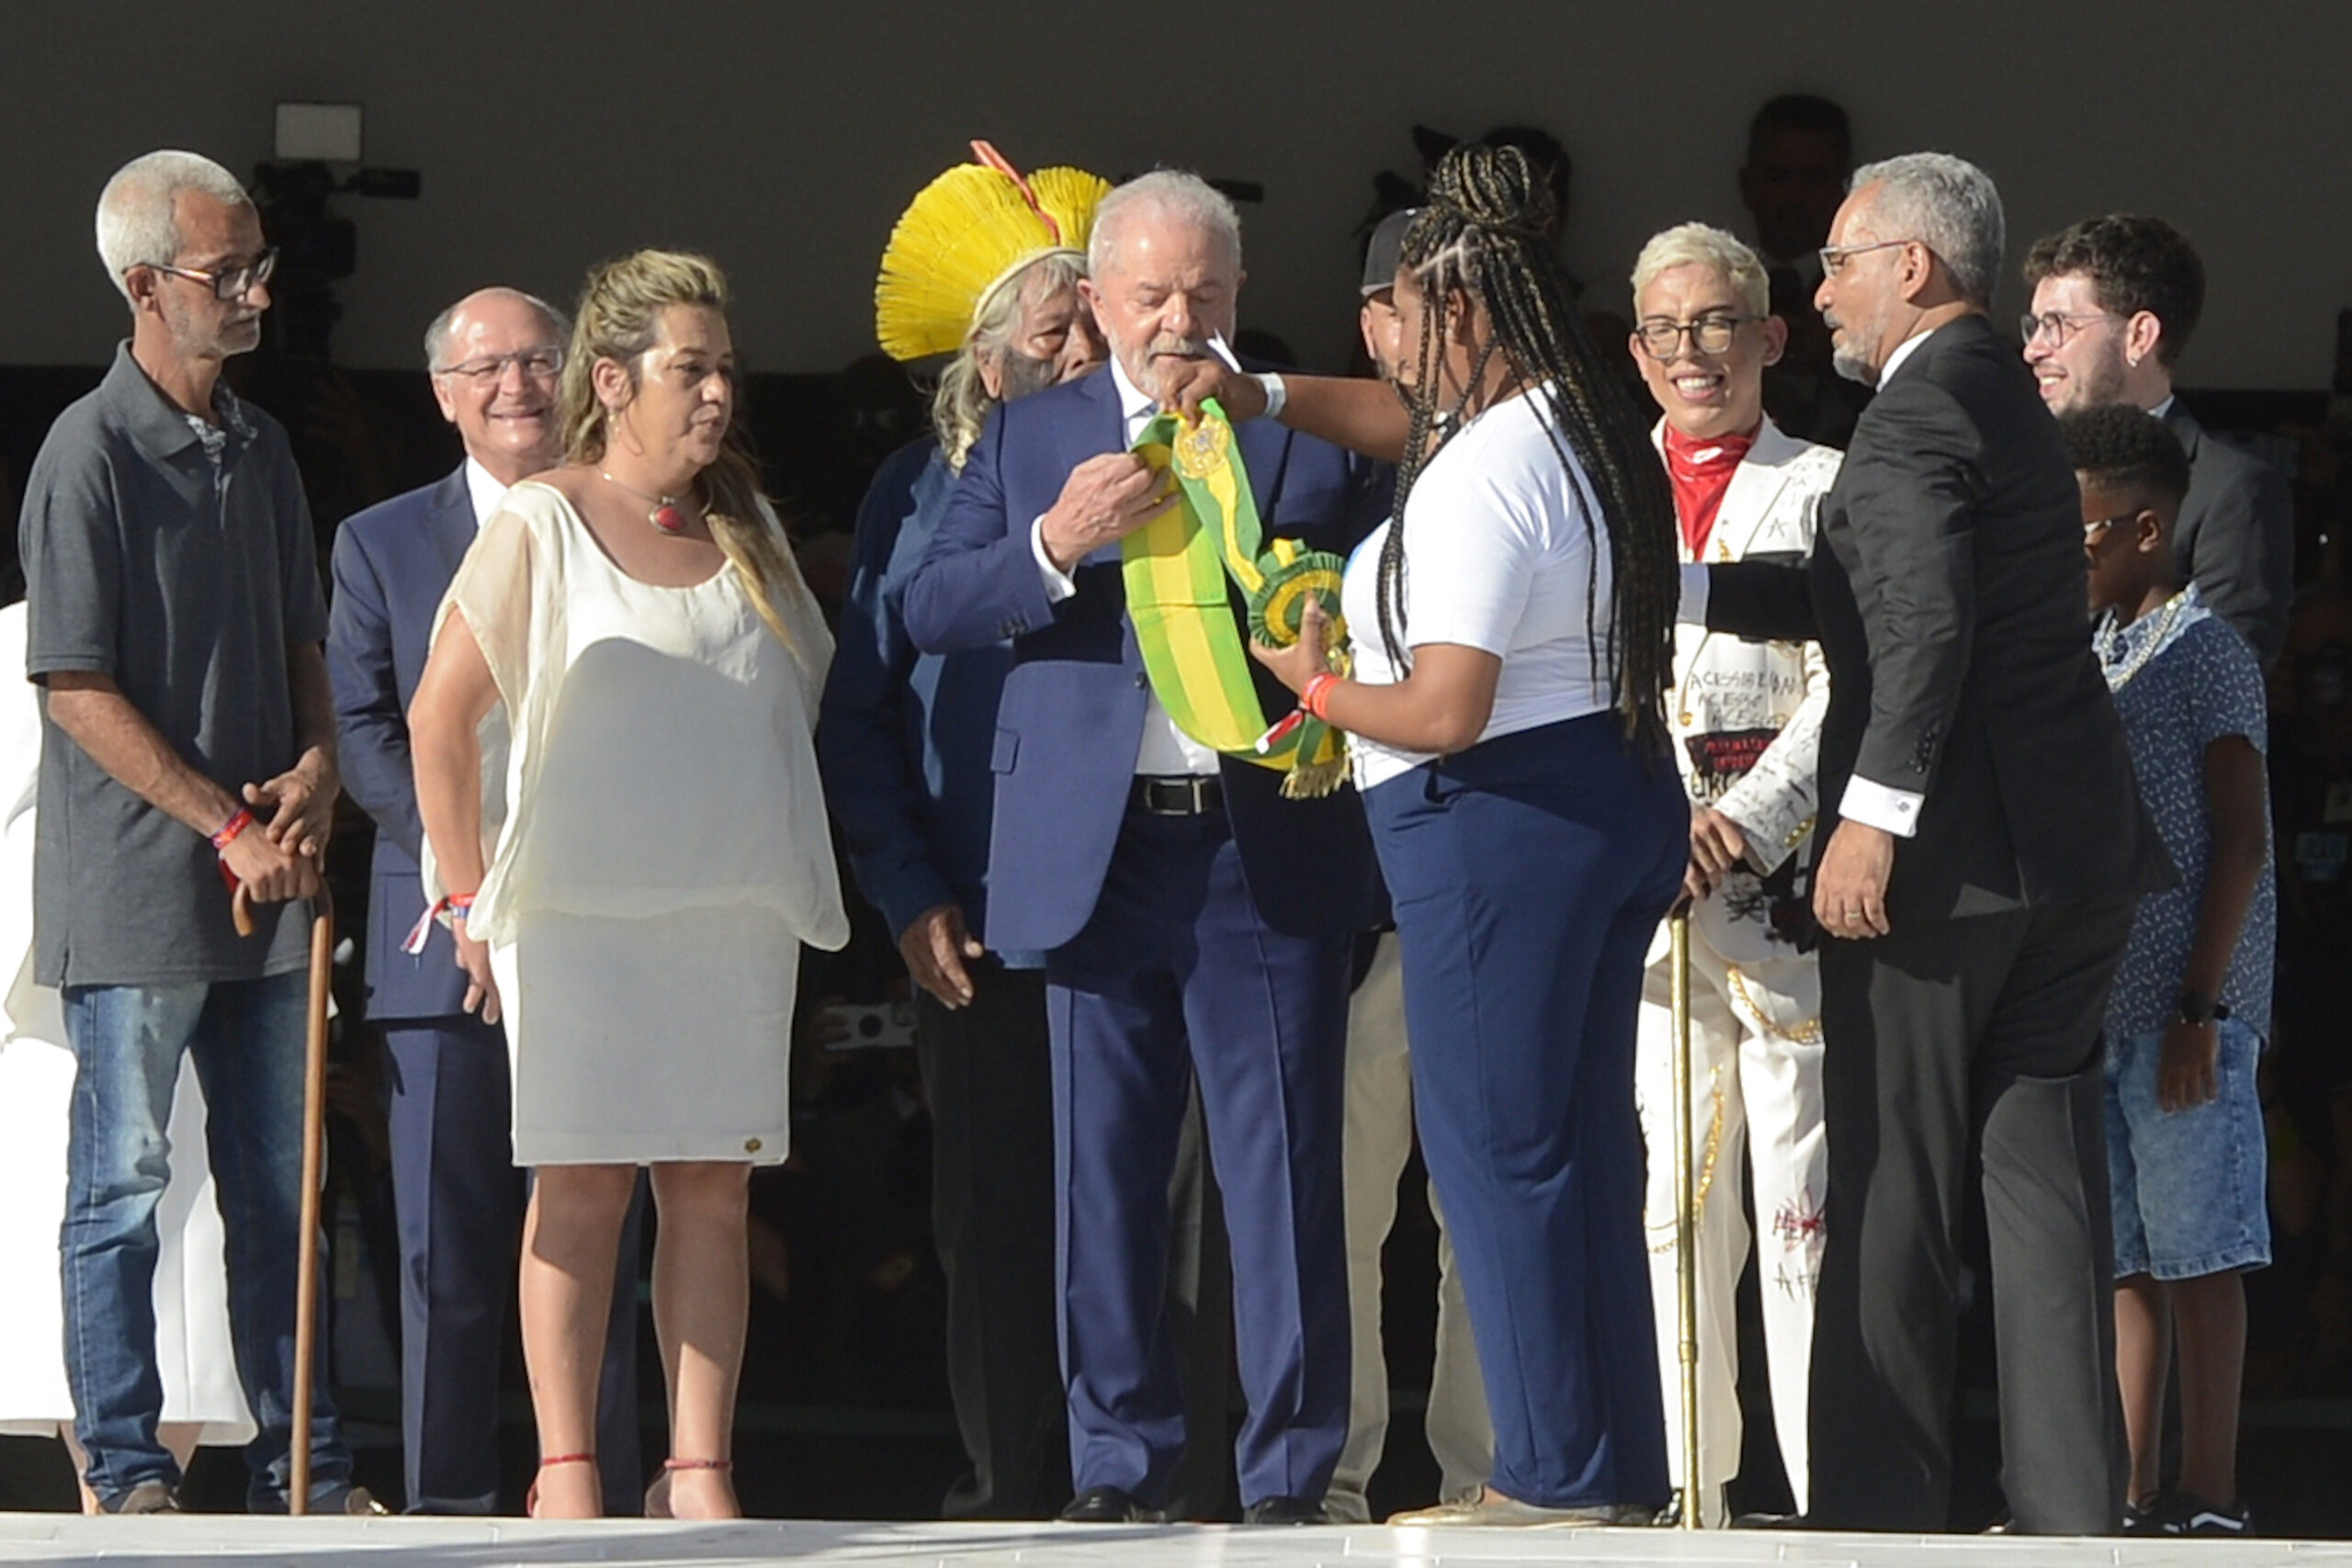 President Lula receives the presidential sash from a civilian during his inauguration marking a new beginning for the country, as heralded by Minister Anielle Franco in this historic speech. Photo: Tomaz Silva/Agência Brasil